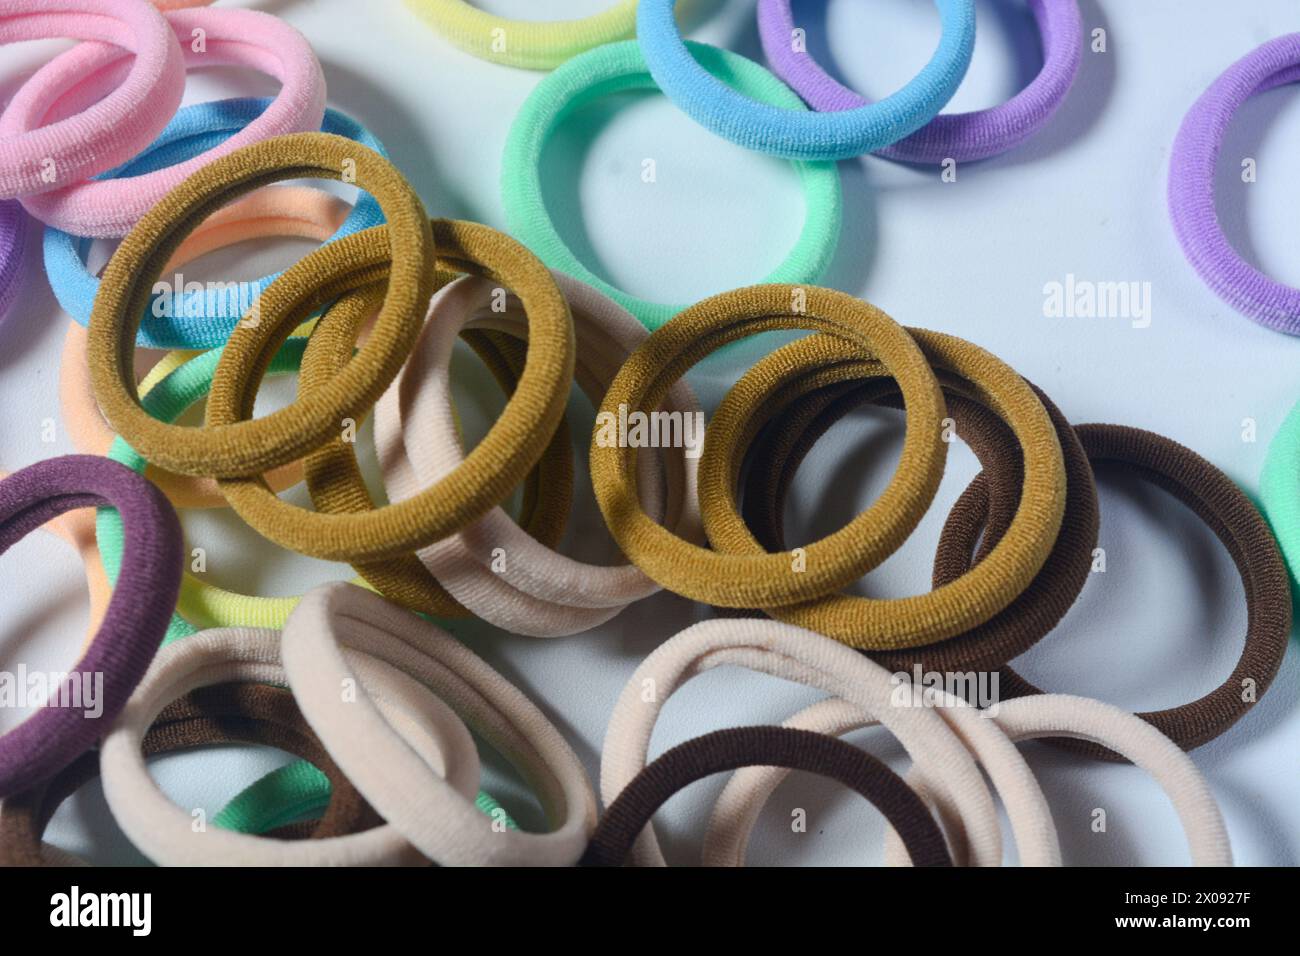 Heap of various hair ties. multicolored elastics isolated  on white background Stock Photo